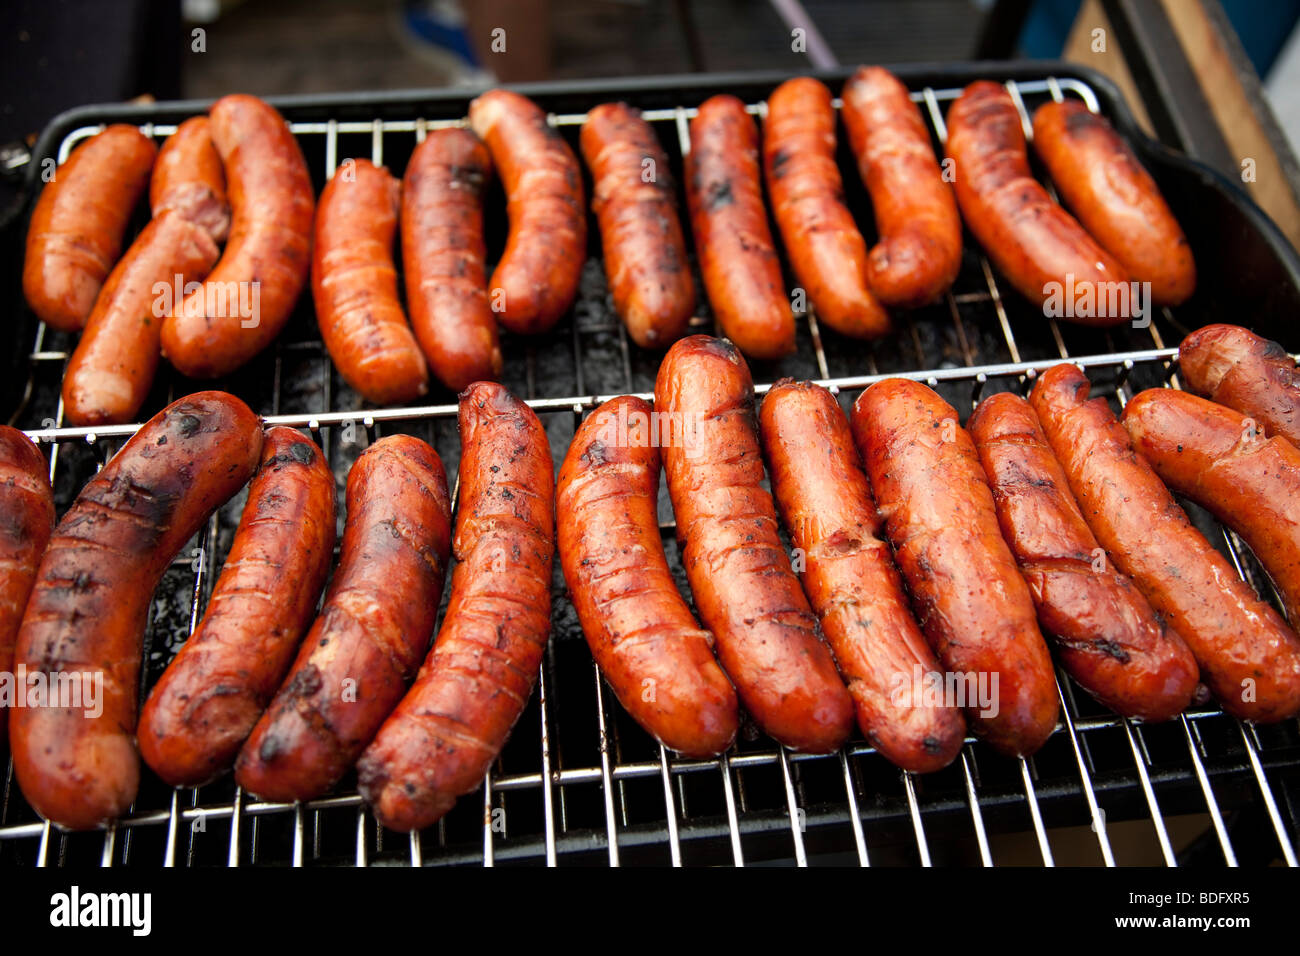 Sausage on a grill. Stock Photo